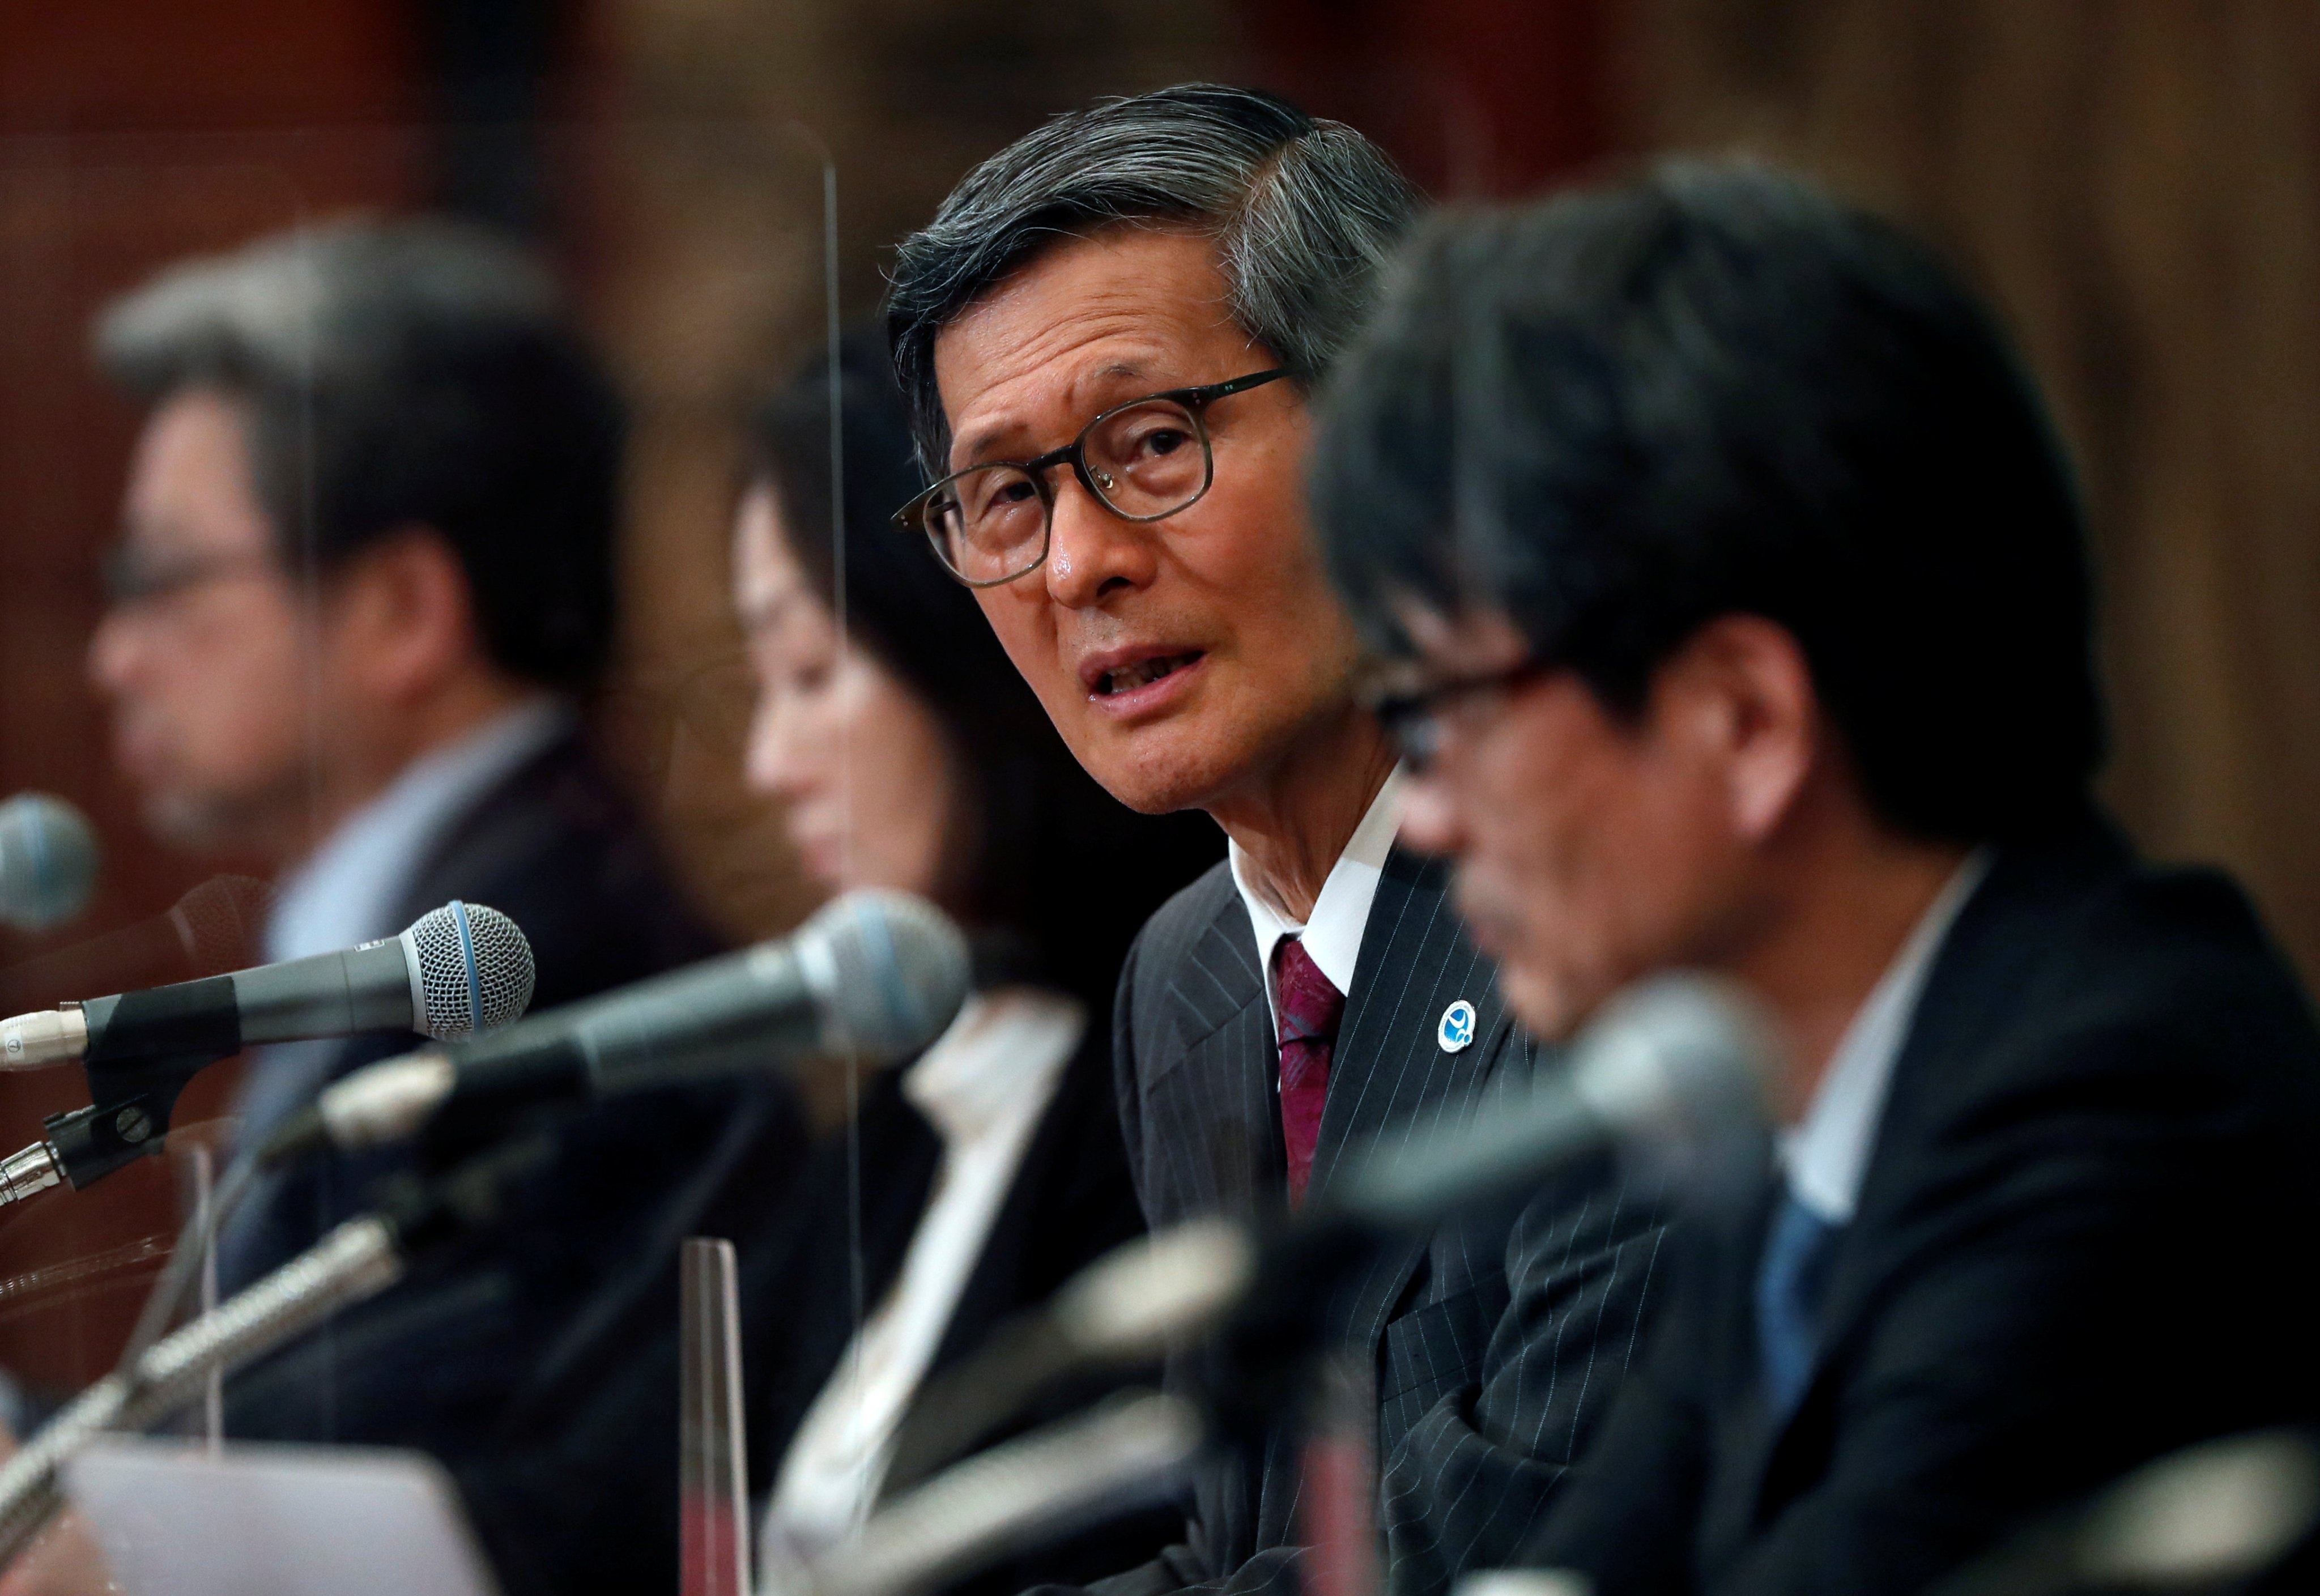 Dr Shigeru Omi, chairman of the Japanese government’s advisory panel on the pandemic, attends an online news conference in Tokyo, Japan, in June 2021. Omi was among the health experts who were targeted. Photo: Reuters